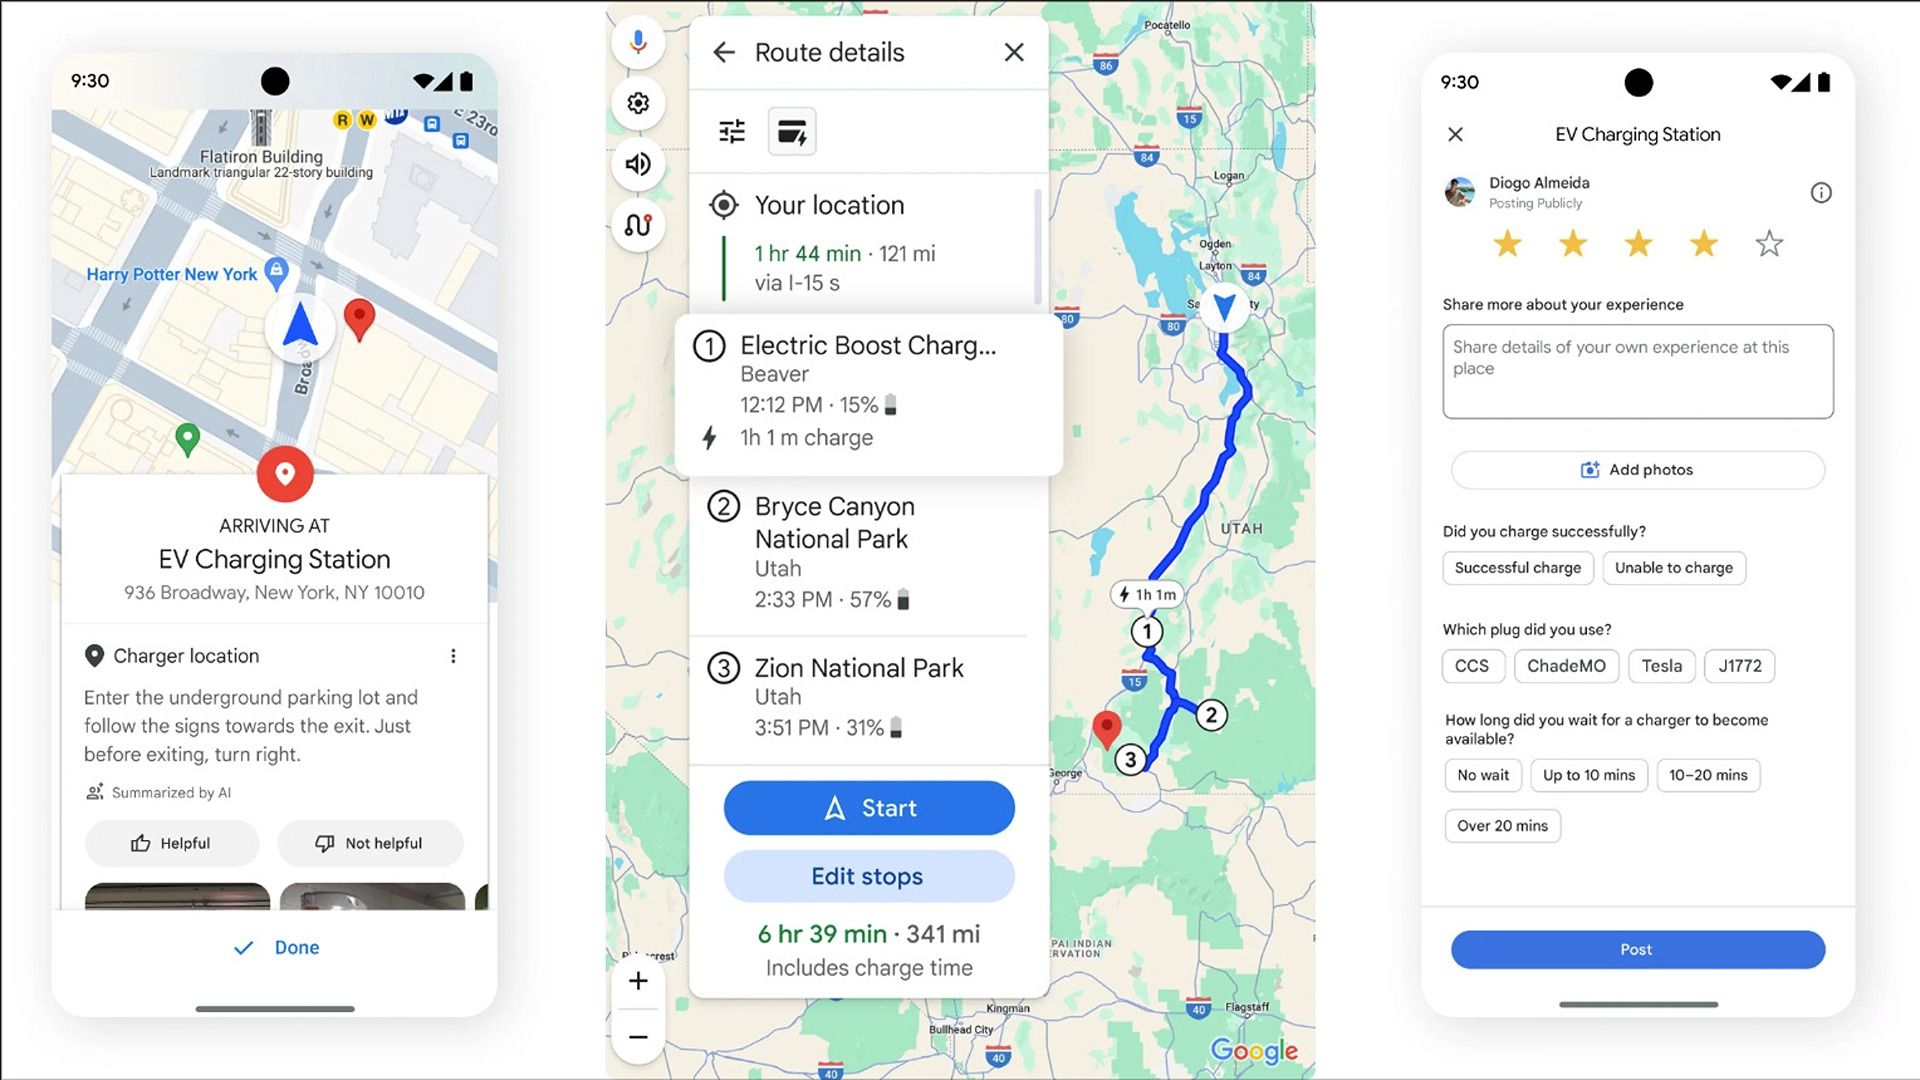 Google Maps Releases Update To Find Exact Location Of EV Chargers